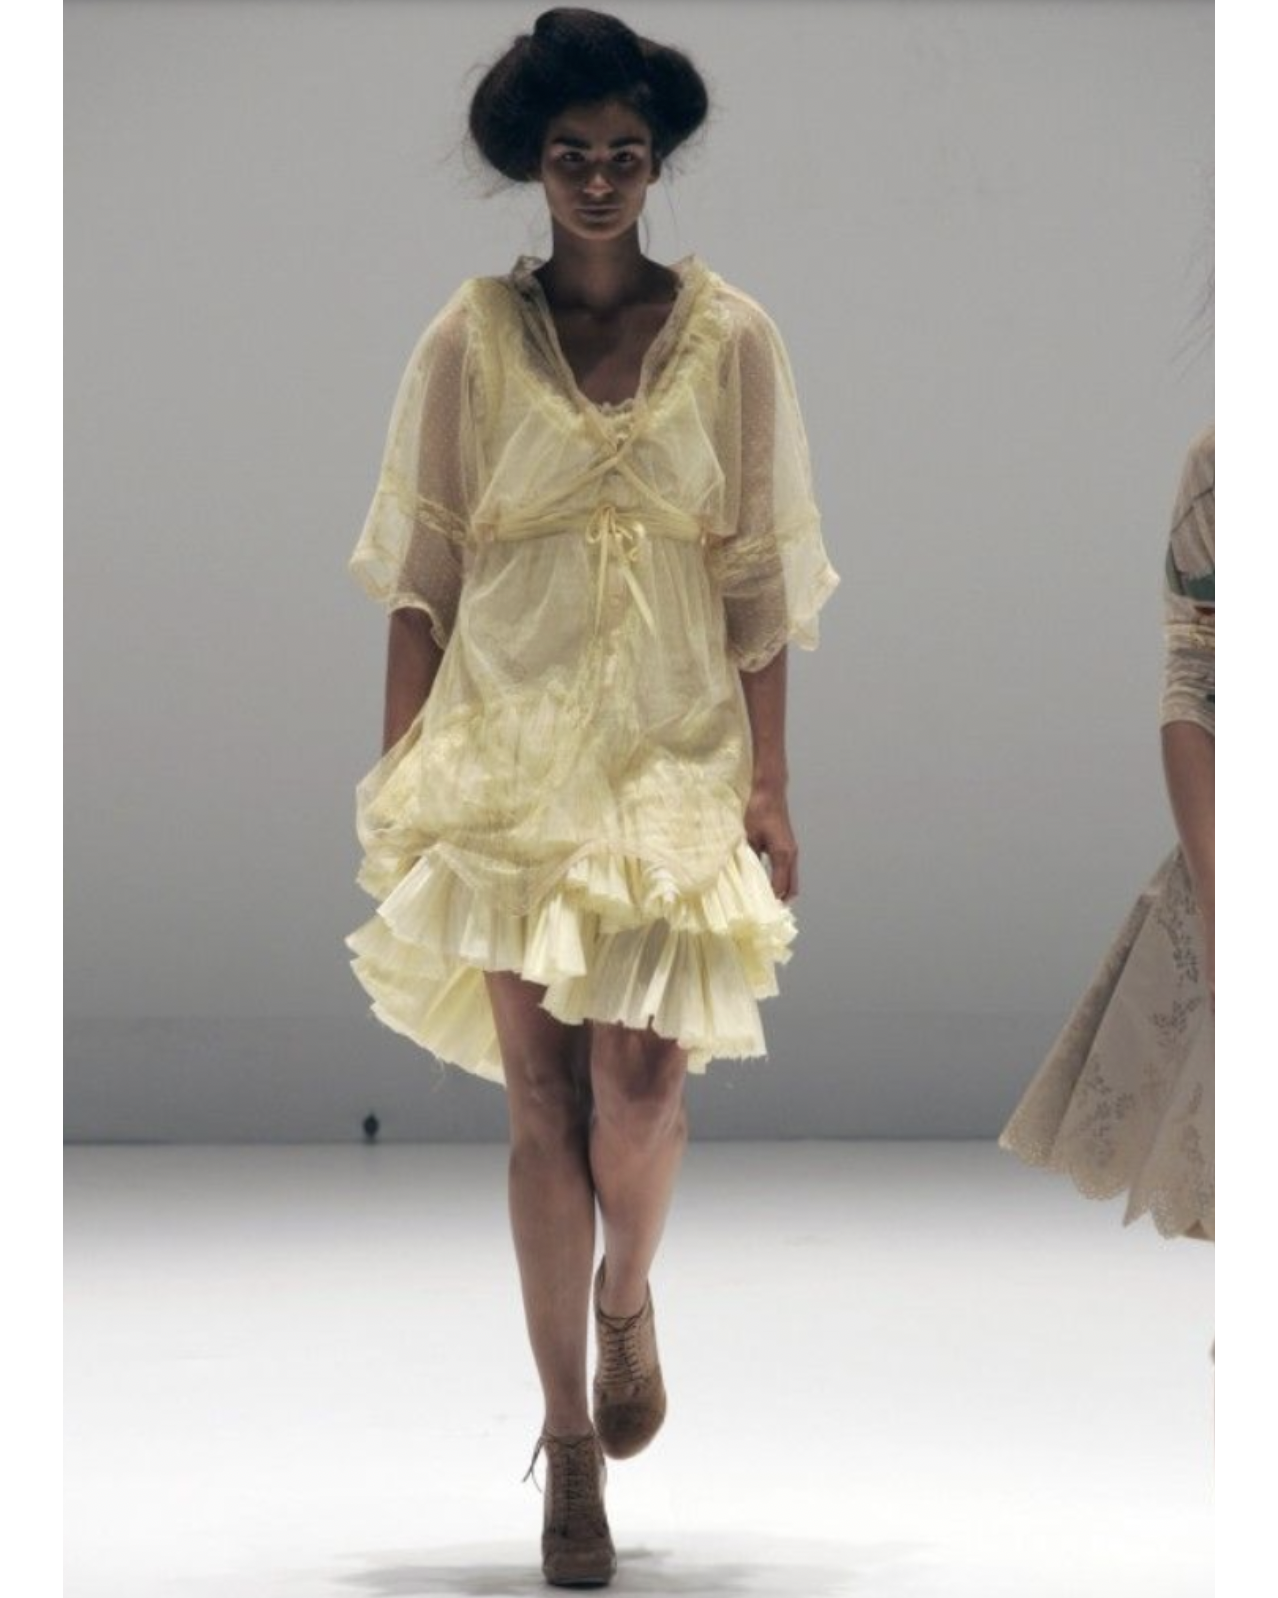 S/S 2005 Pale Yellow Pleated and Lace Cotton Dress